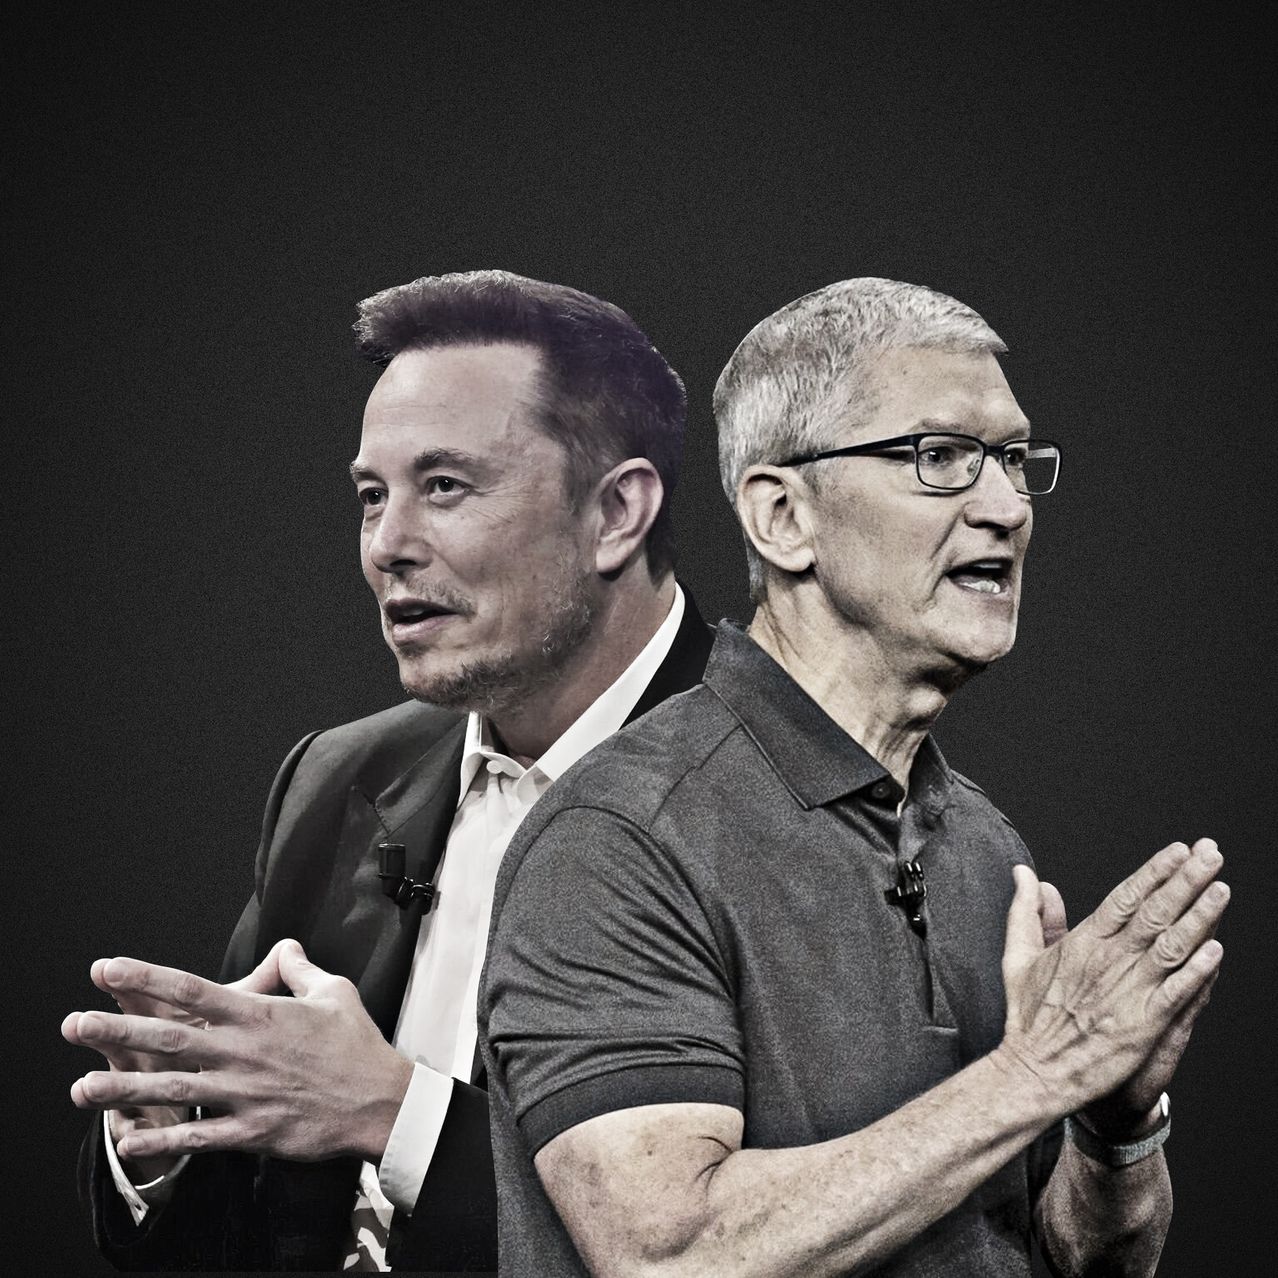 Elon Musk and Tim Cook PHOTO ILLUSTRATION BY EMIL LENDOF/THE WALL STREET JOURNAL; BLOOMBERG NEWS (2)